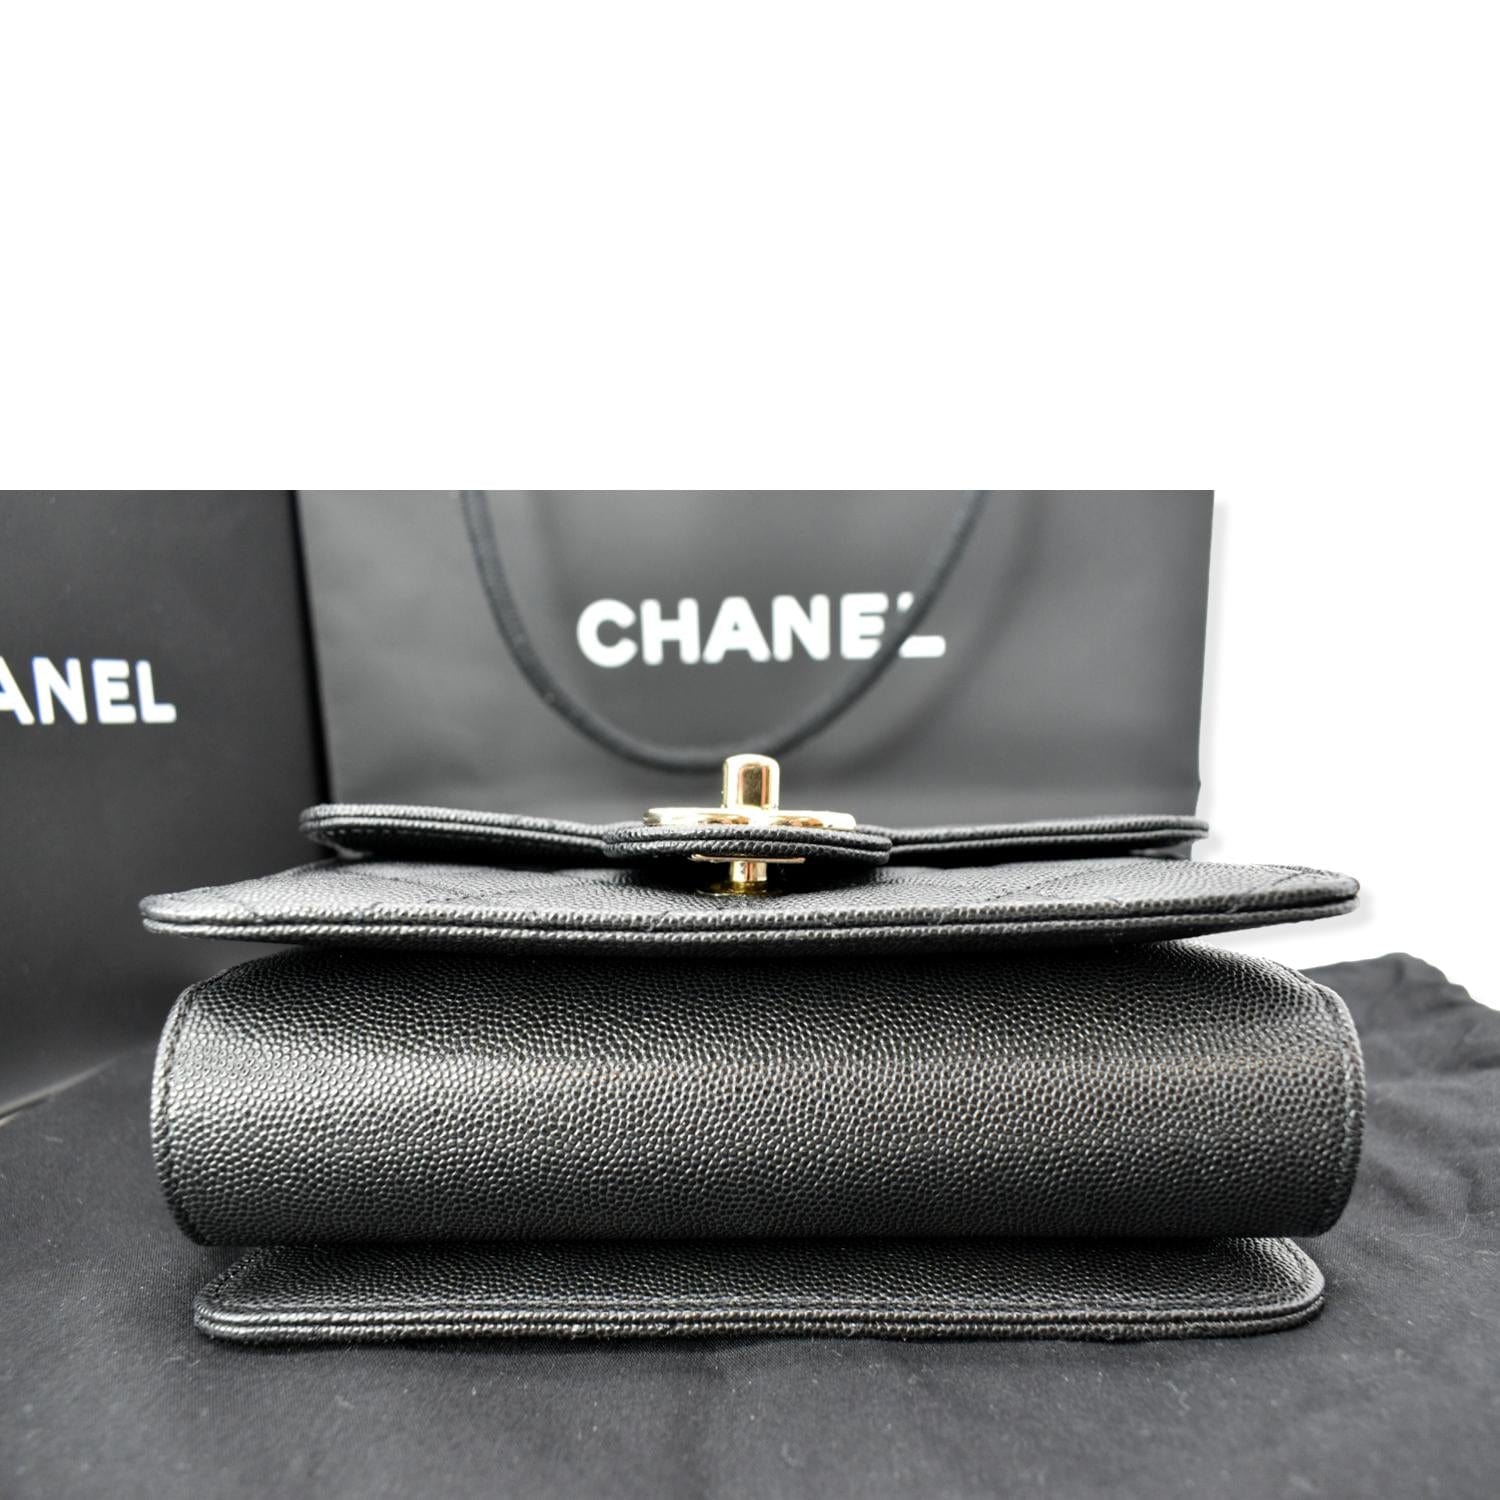 Chanel Classic Small Flap Wallet w/ Tags - Black Wallets